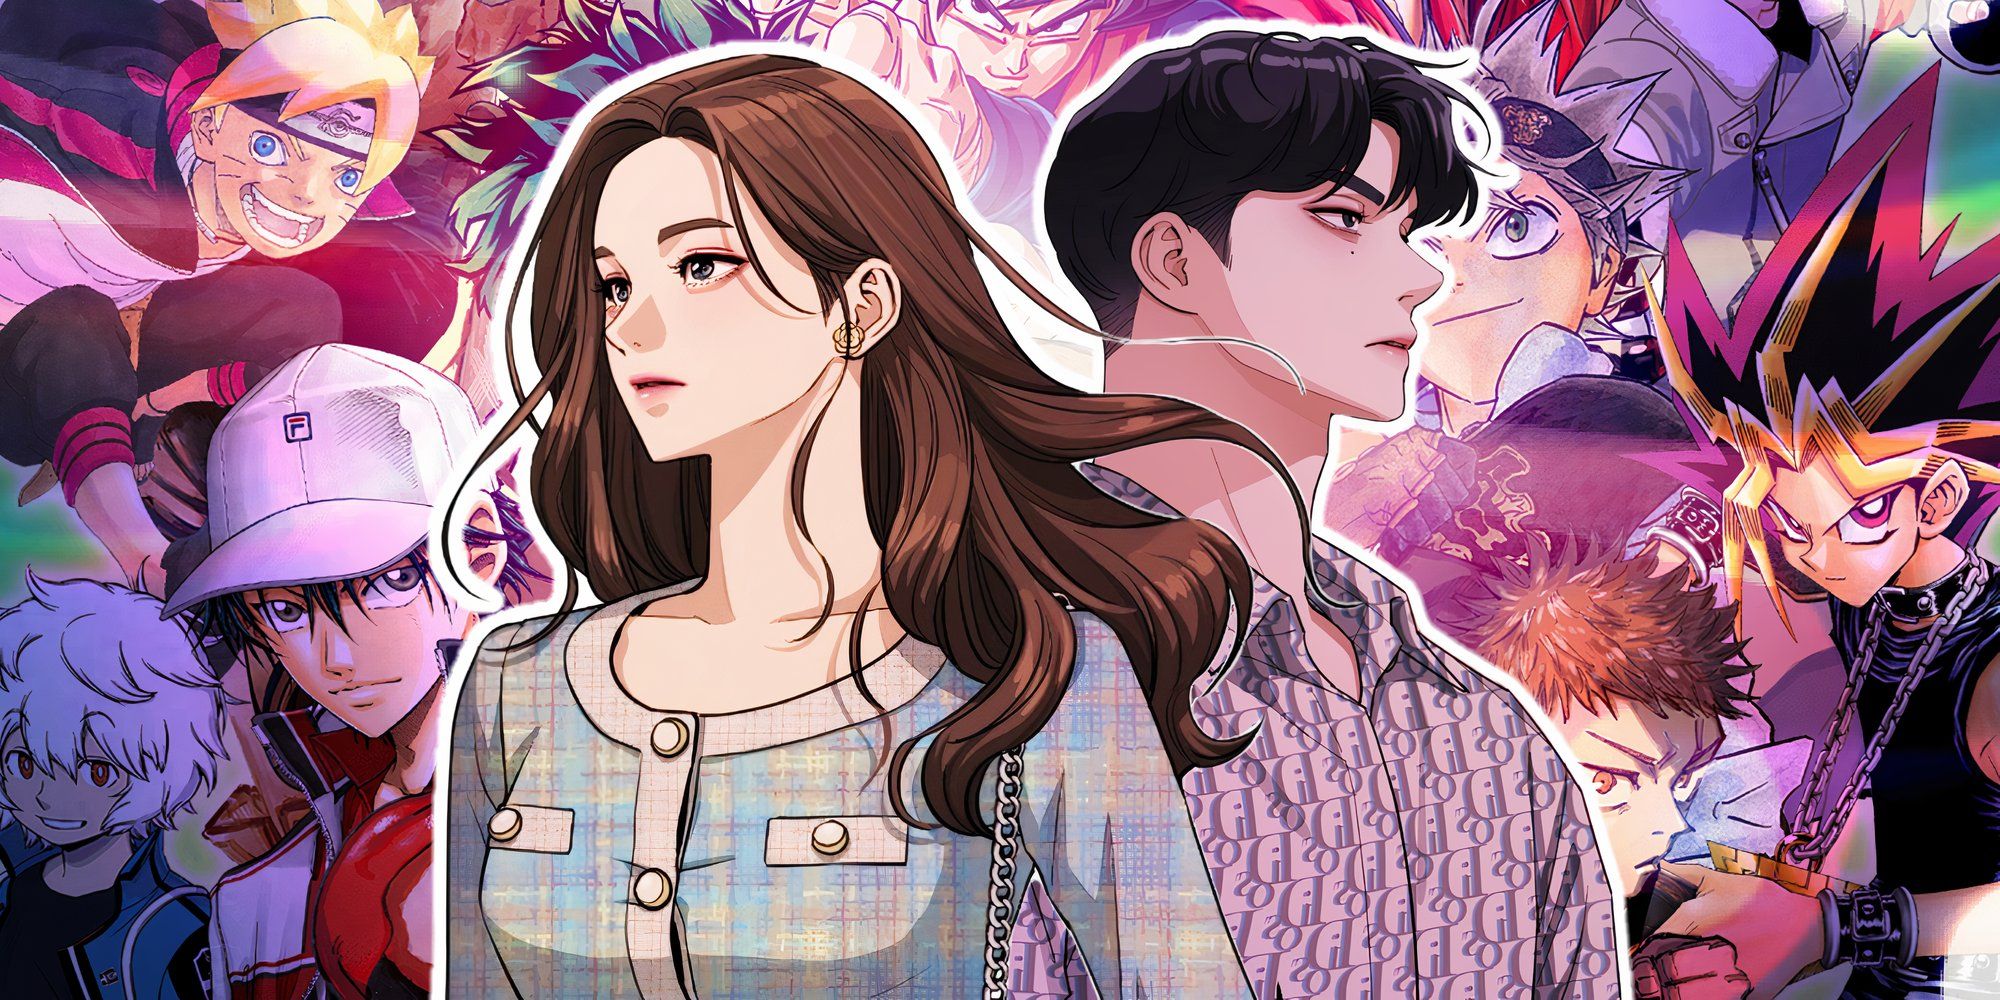 minyoung and iseop from the webtoon iseop's romance in the center with manga characters from shonen jump in the background